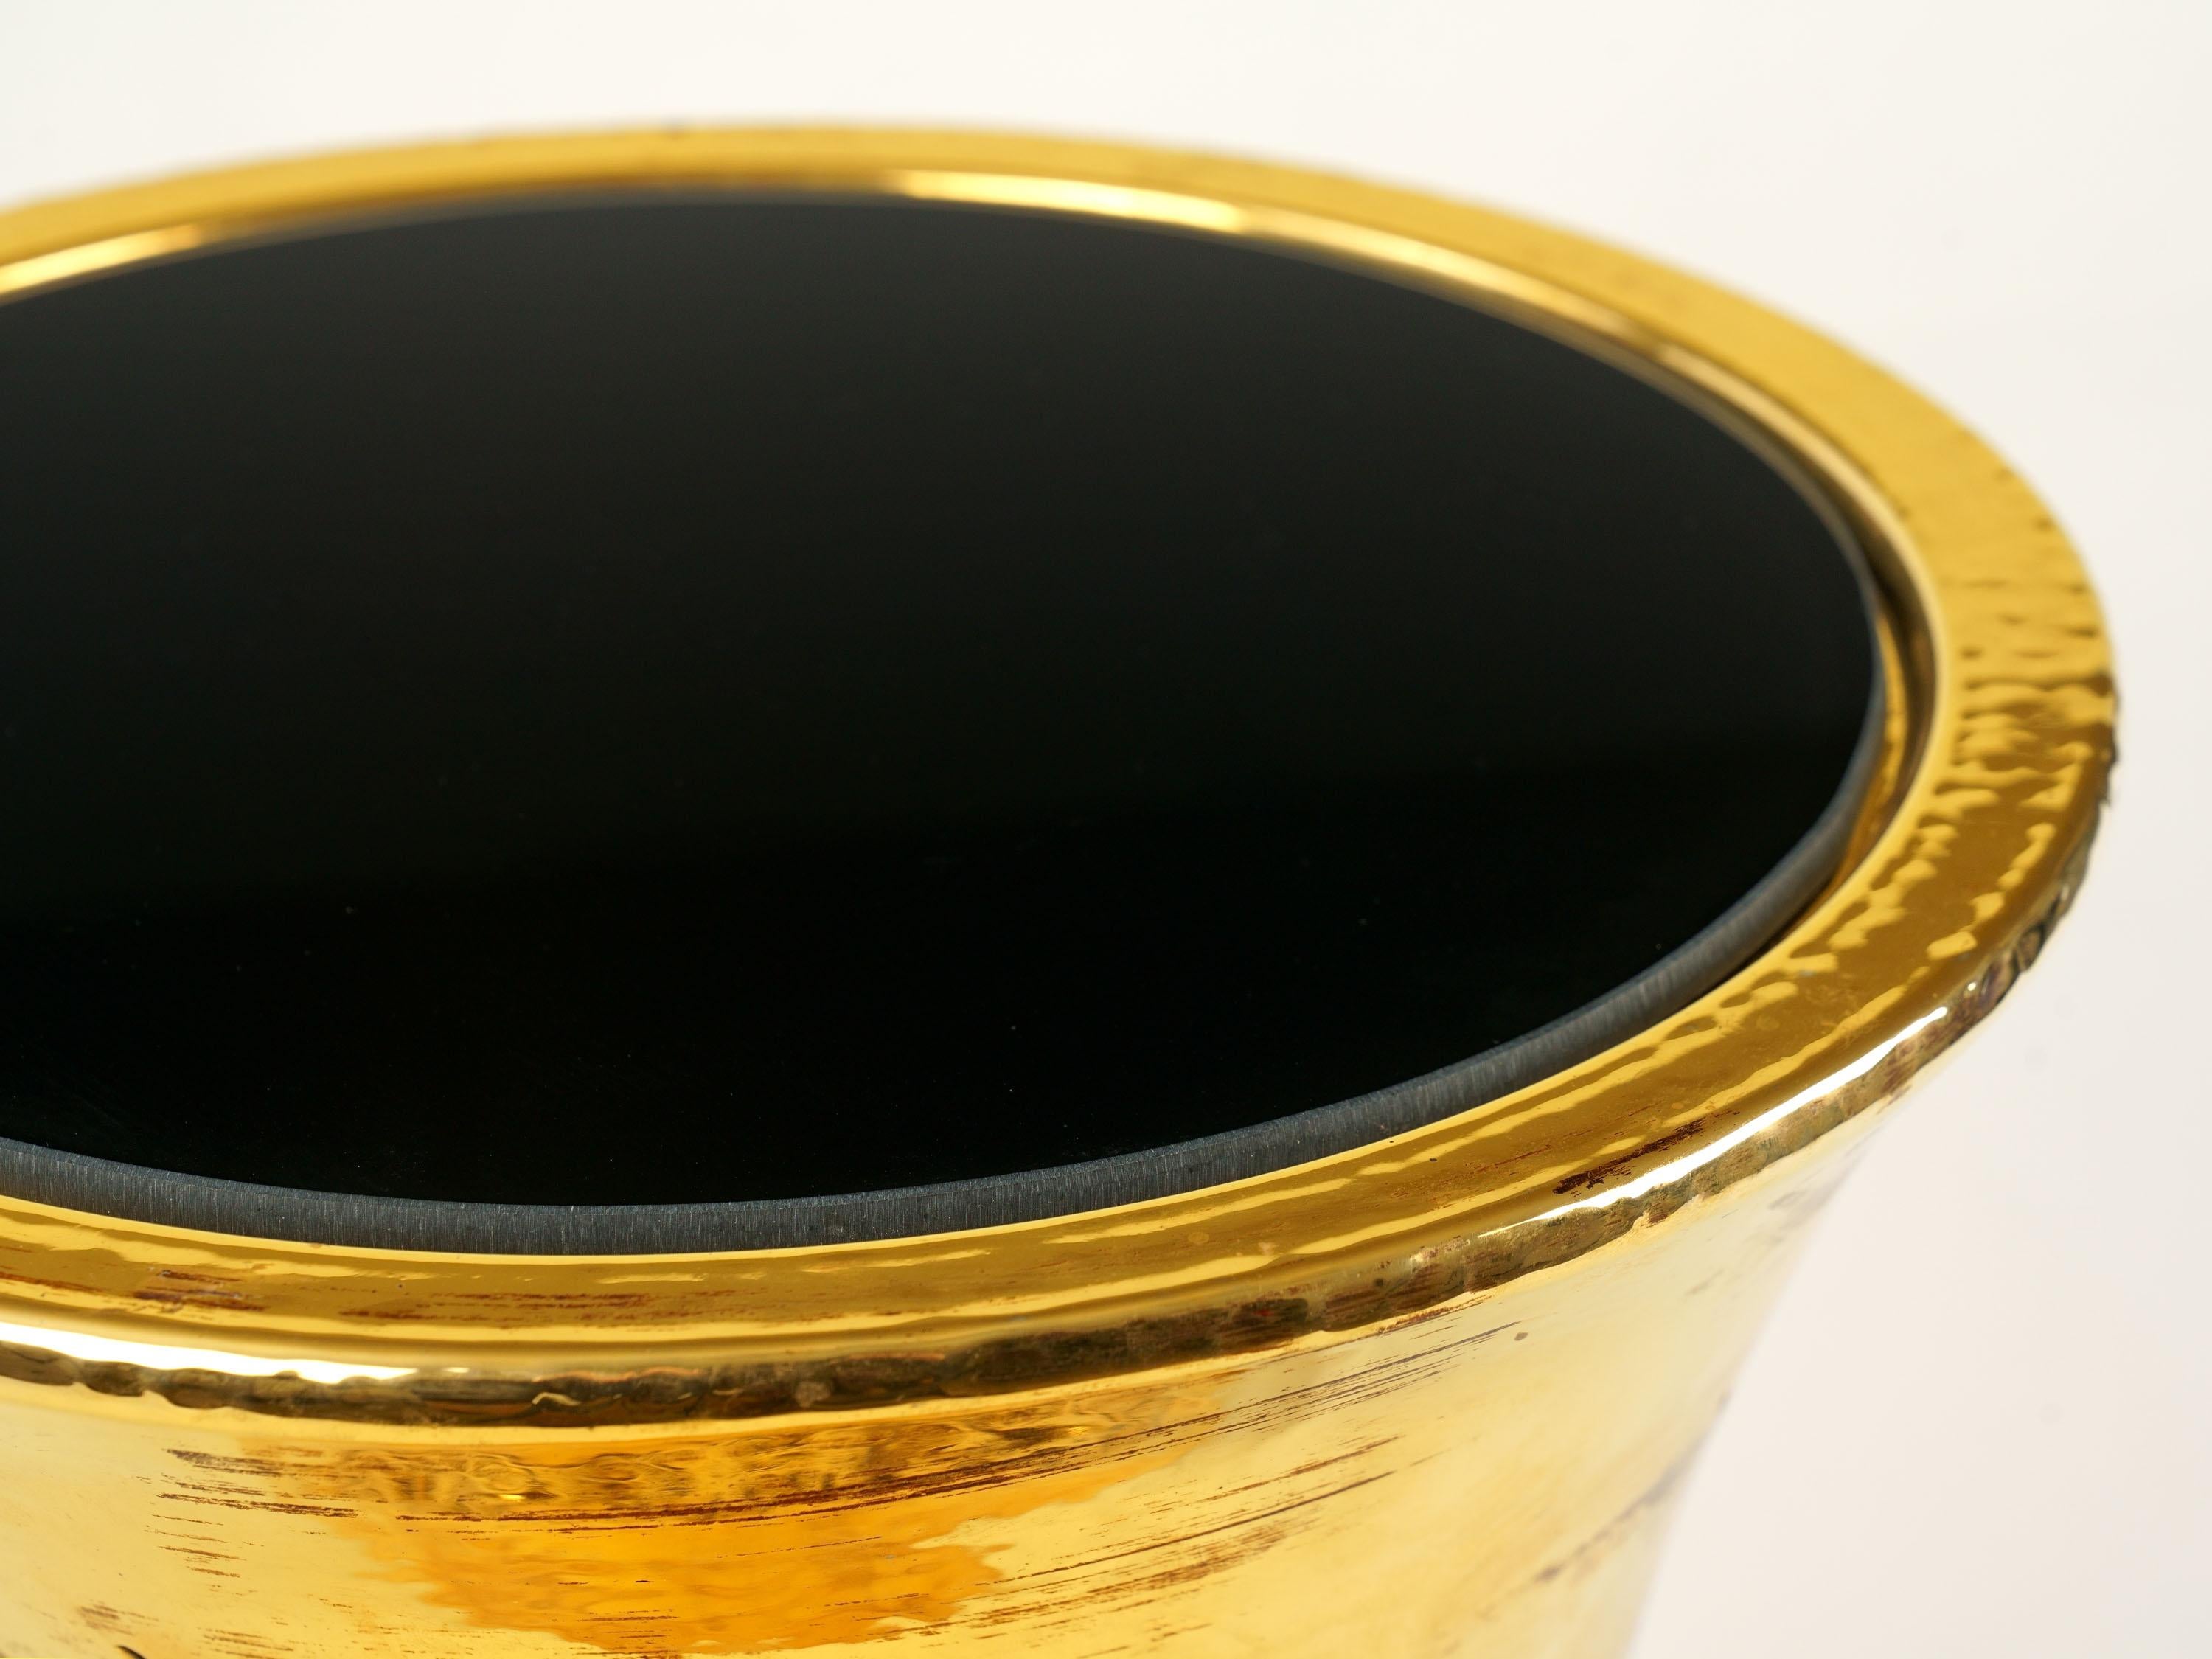 Circular Side Table Luster 24 Karat Gold Ceramic Sculpture Top Black Glass Italy For Sale 2